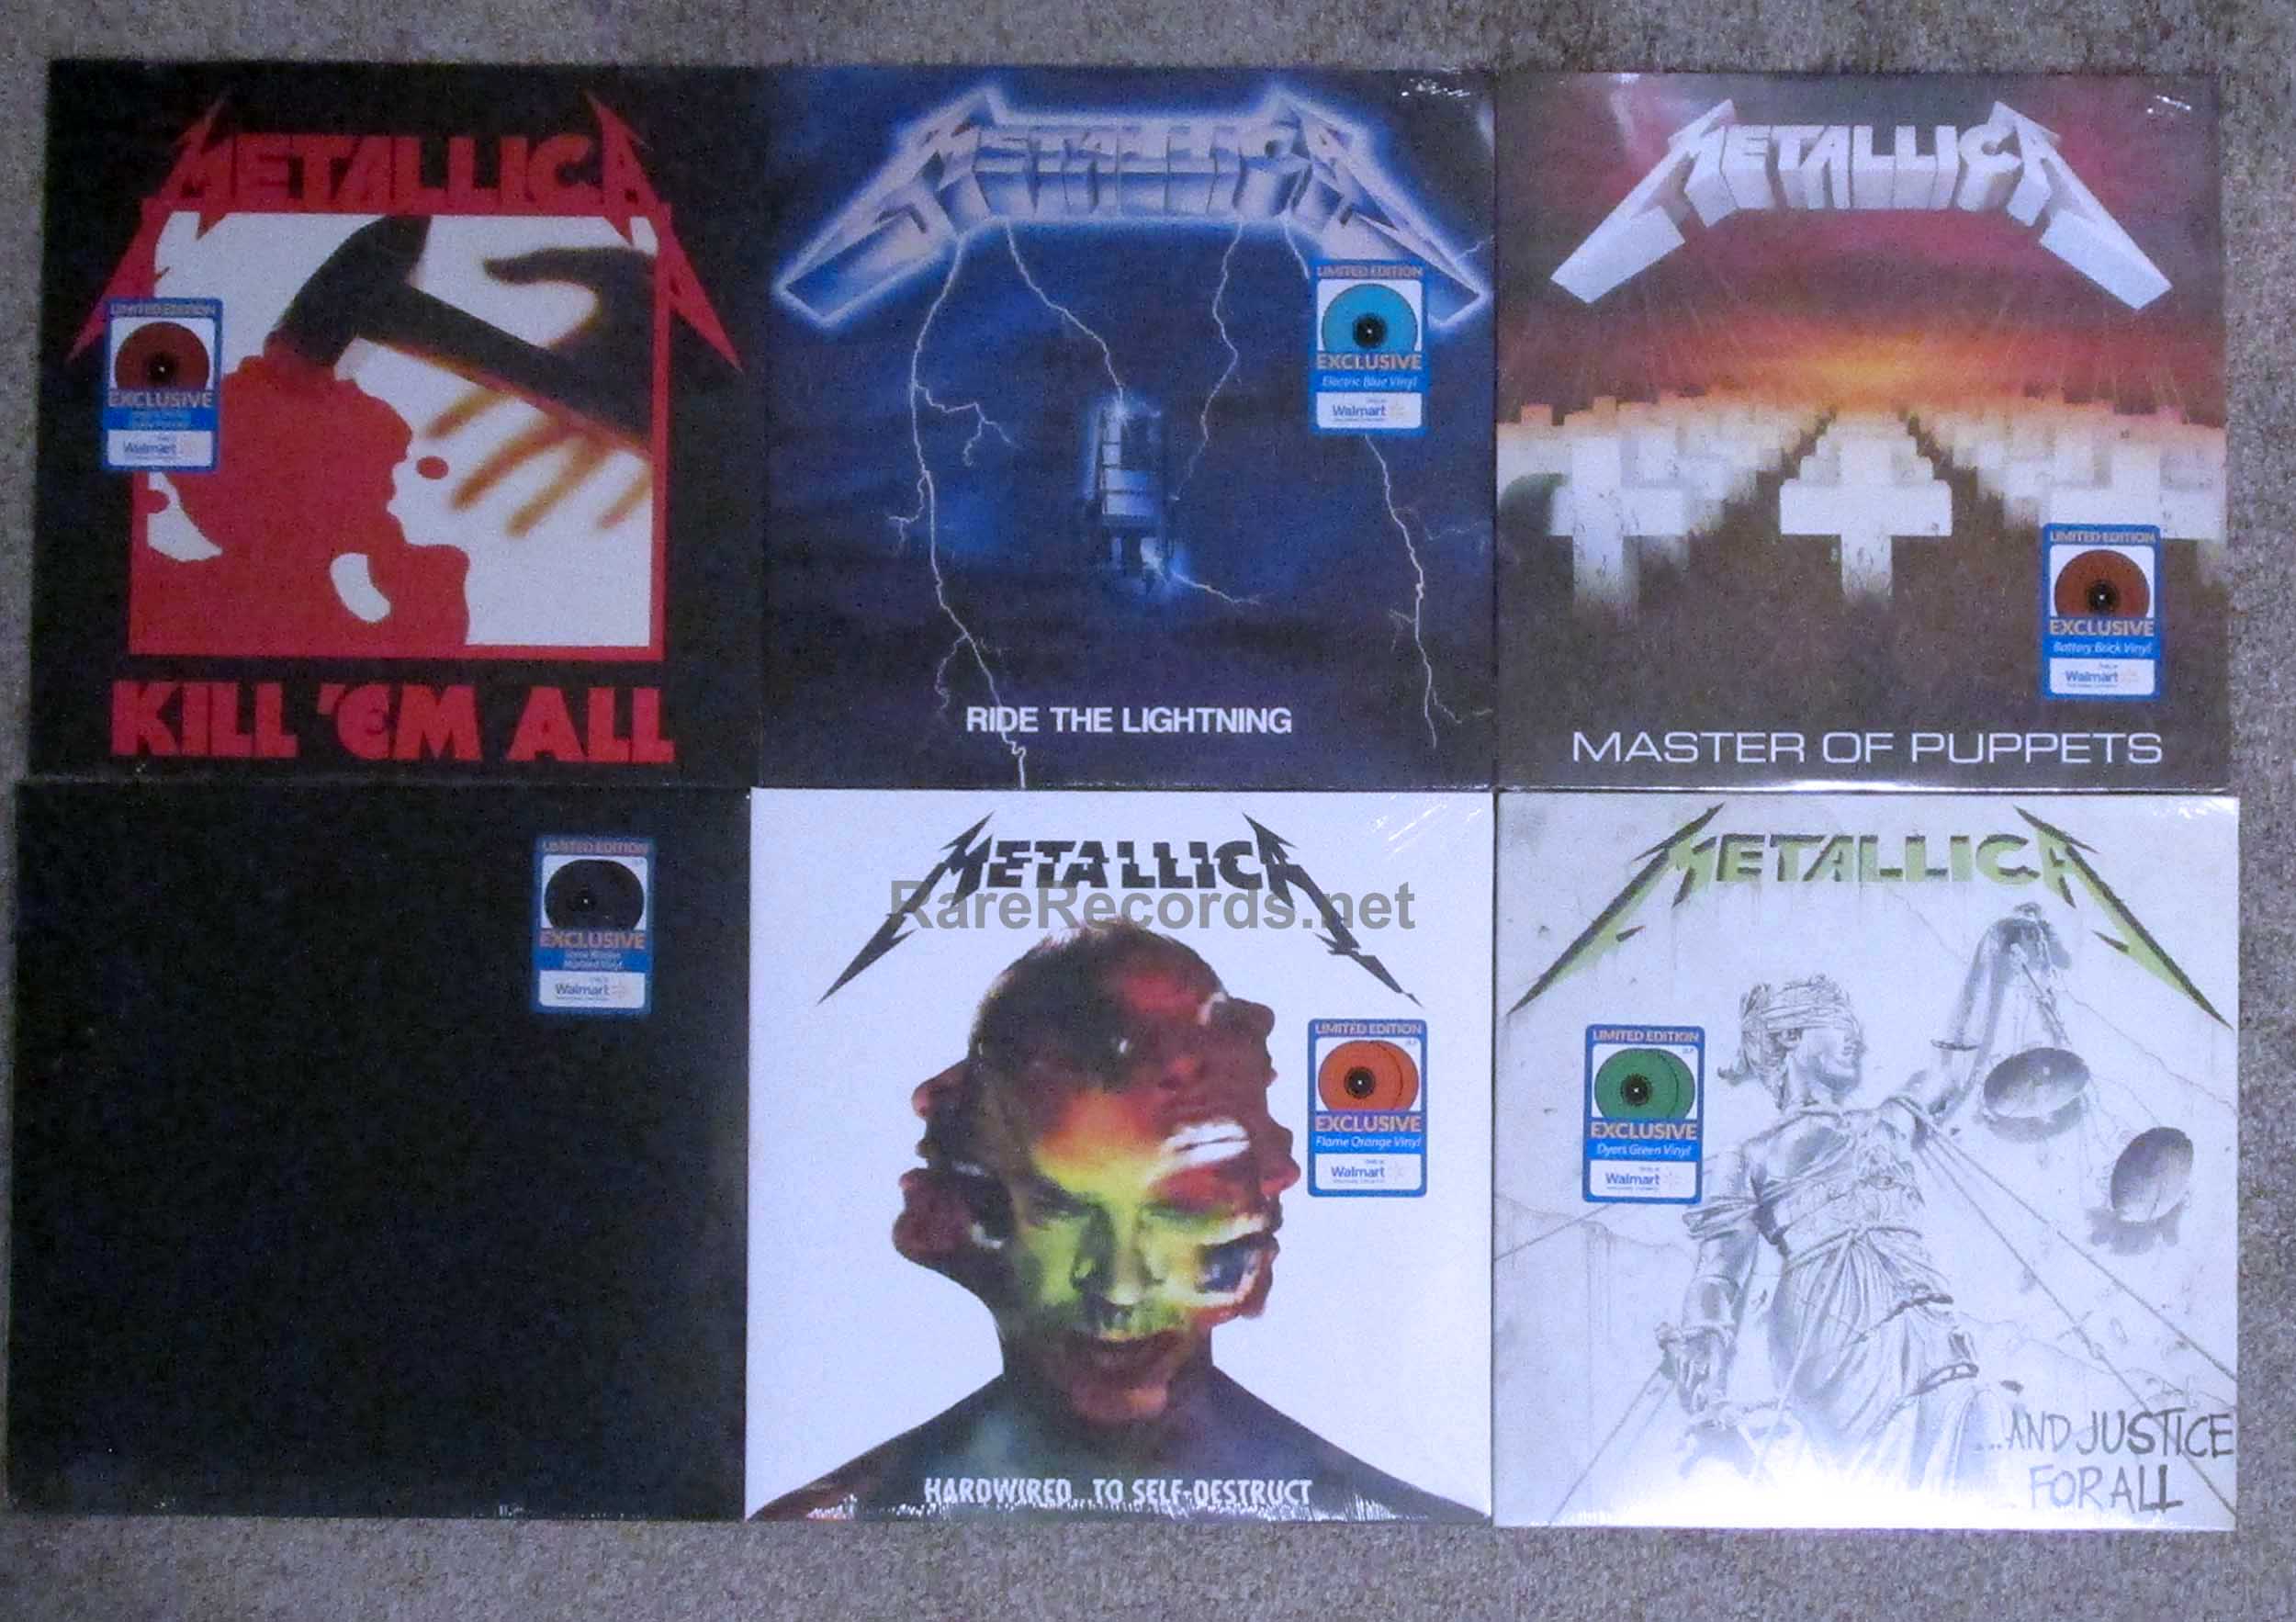 Metallica And Justice For All (Dyers Green Coloured Vinyl)